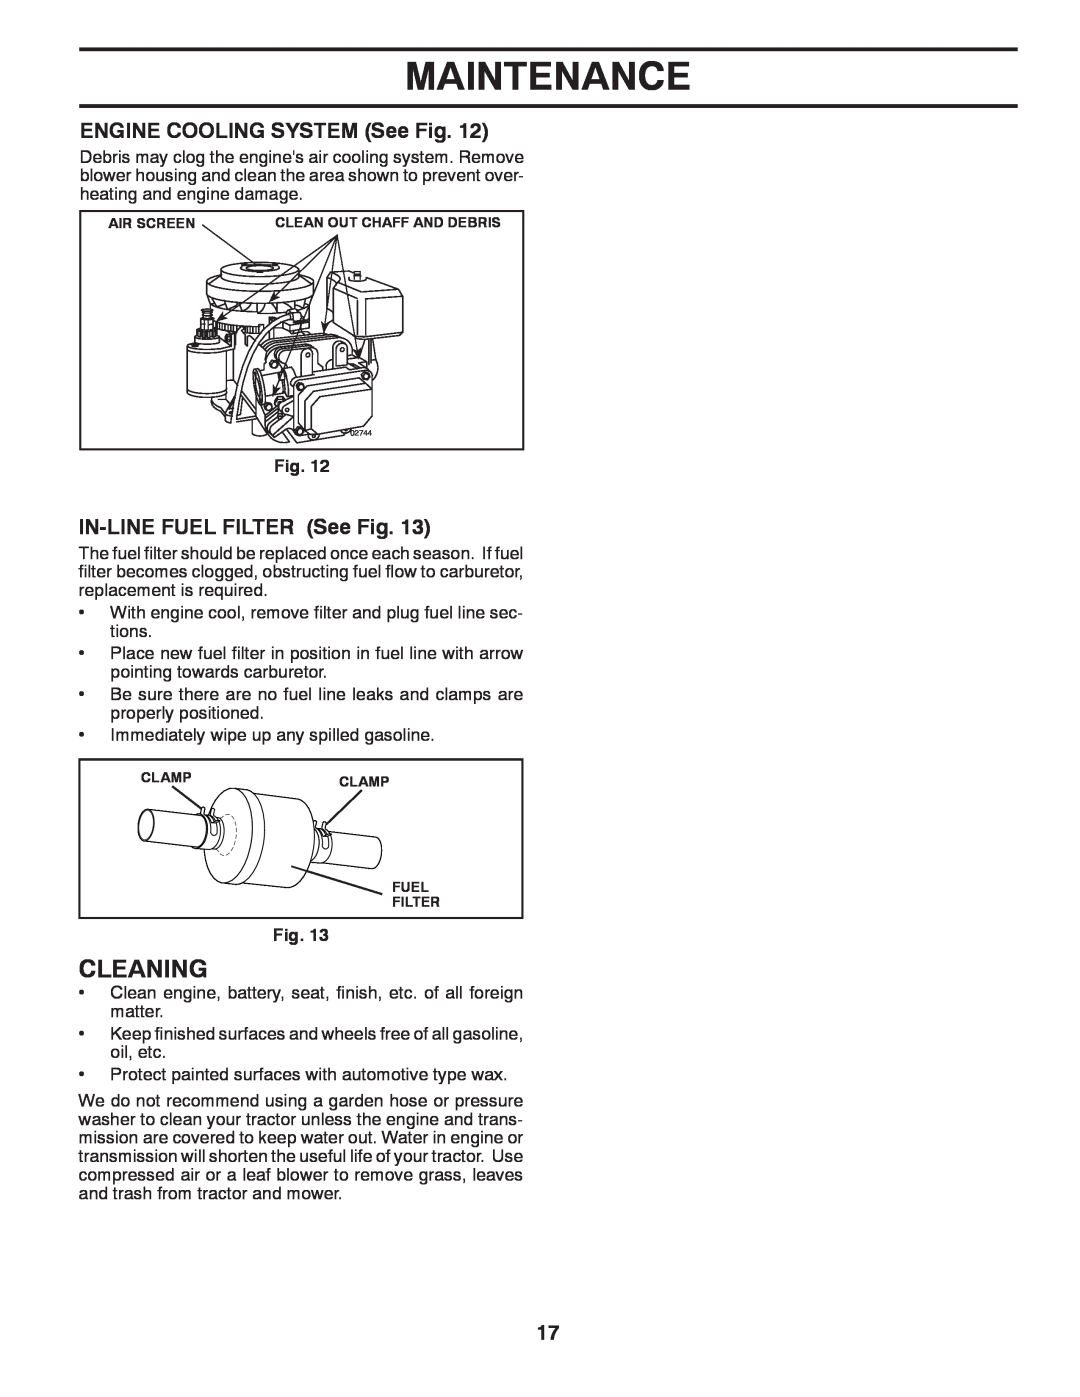 Poulan PO12538LT warranty Cleaning, ENGINE COOLING SYSTEM See Fig, IN-LINEFUEL FILTER See Fig, Maintenance 